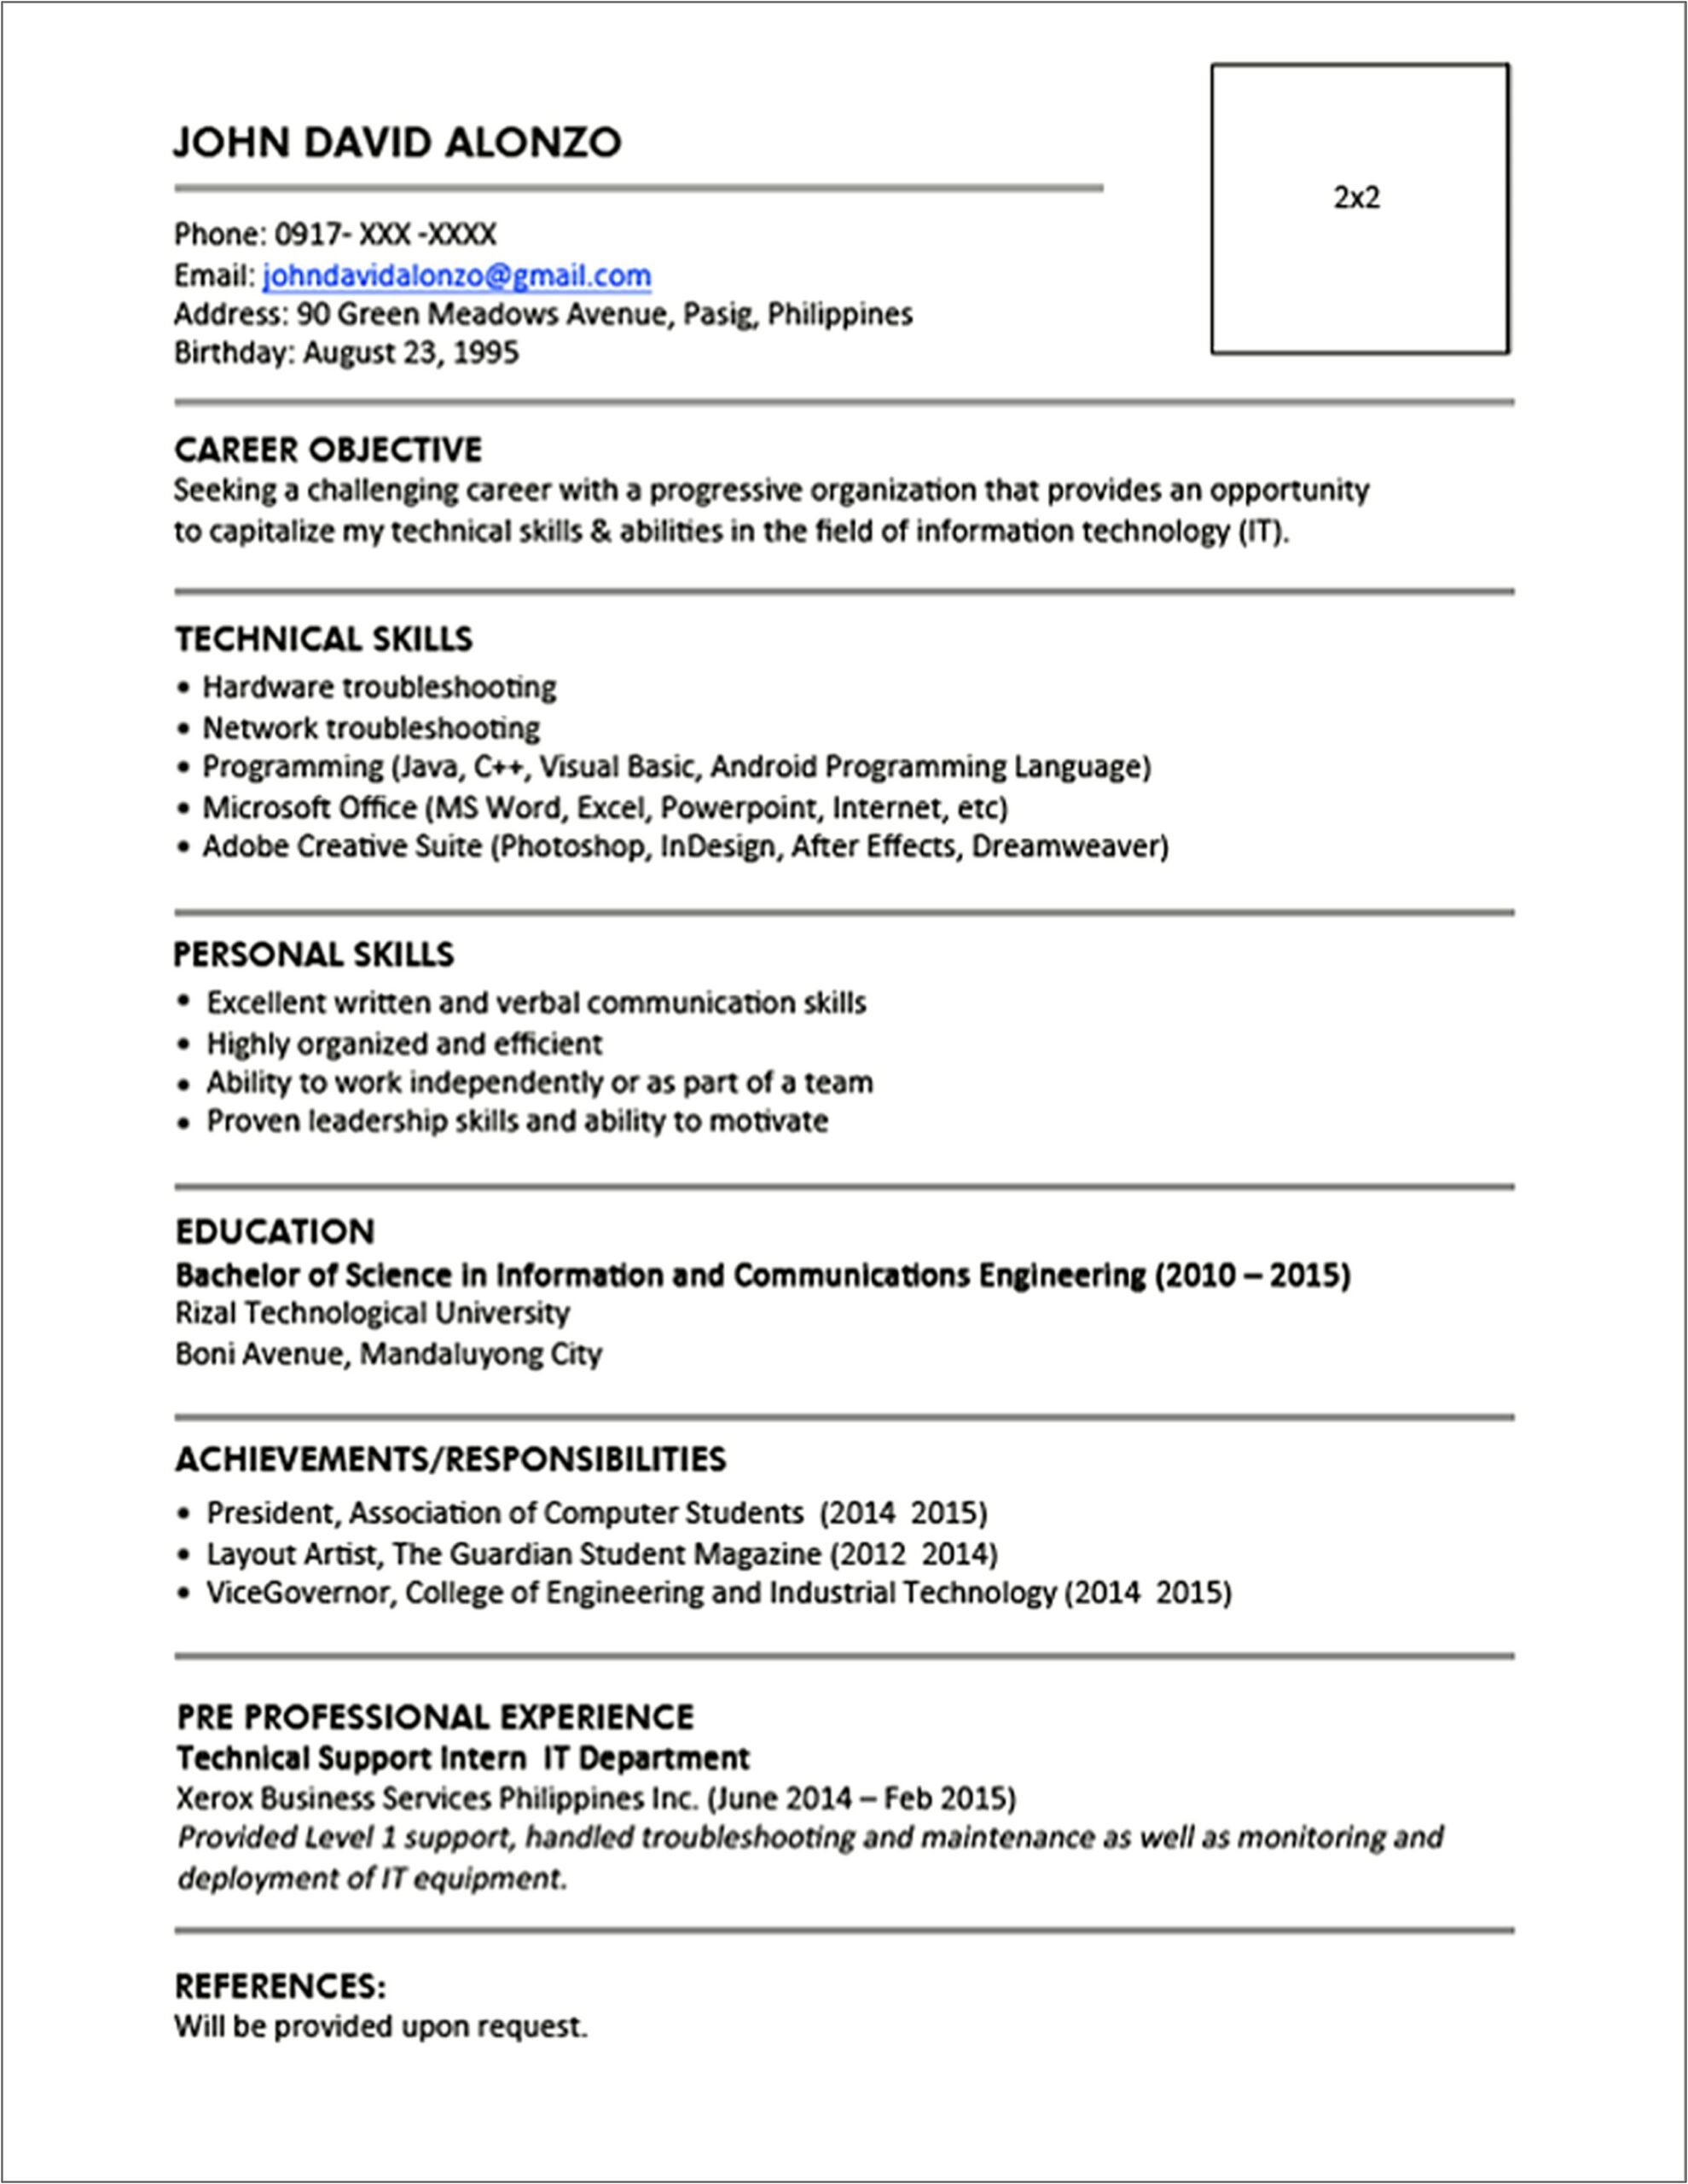 Sample Resume With Eligibility Philippines